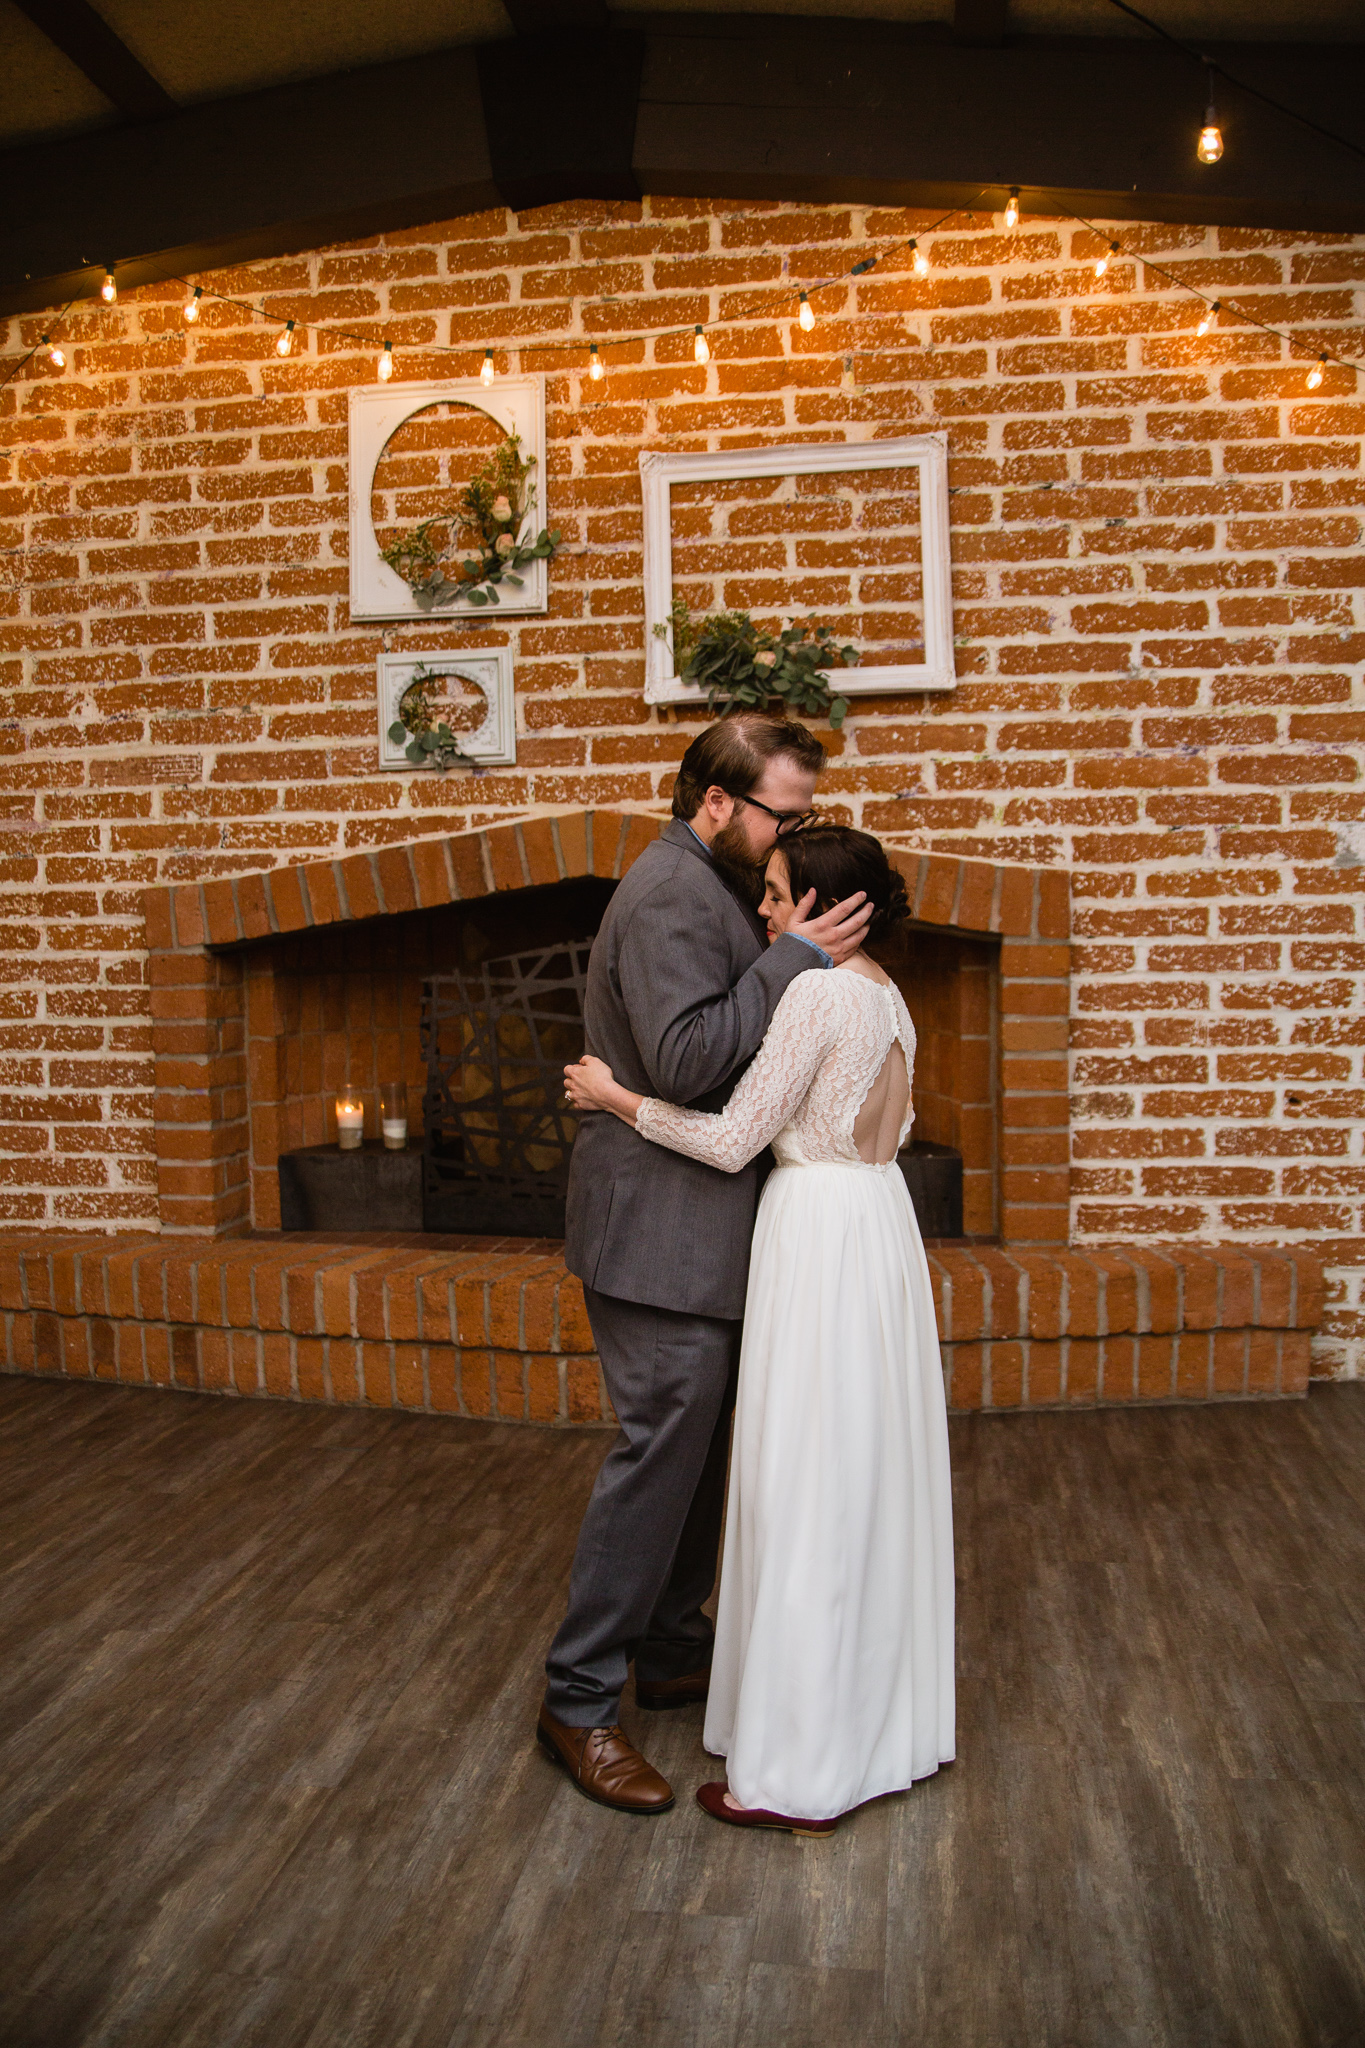 Bride and groom share an intimate moment during the first dance at their wedding reception.